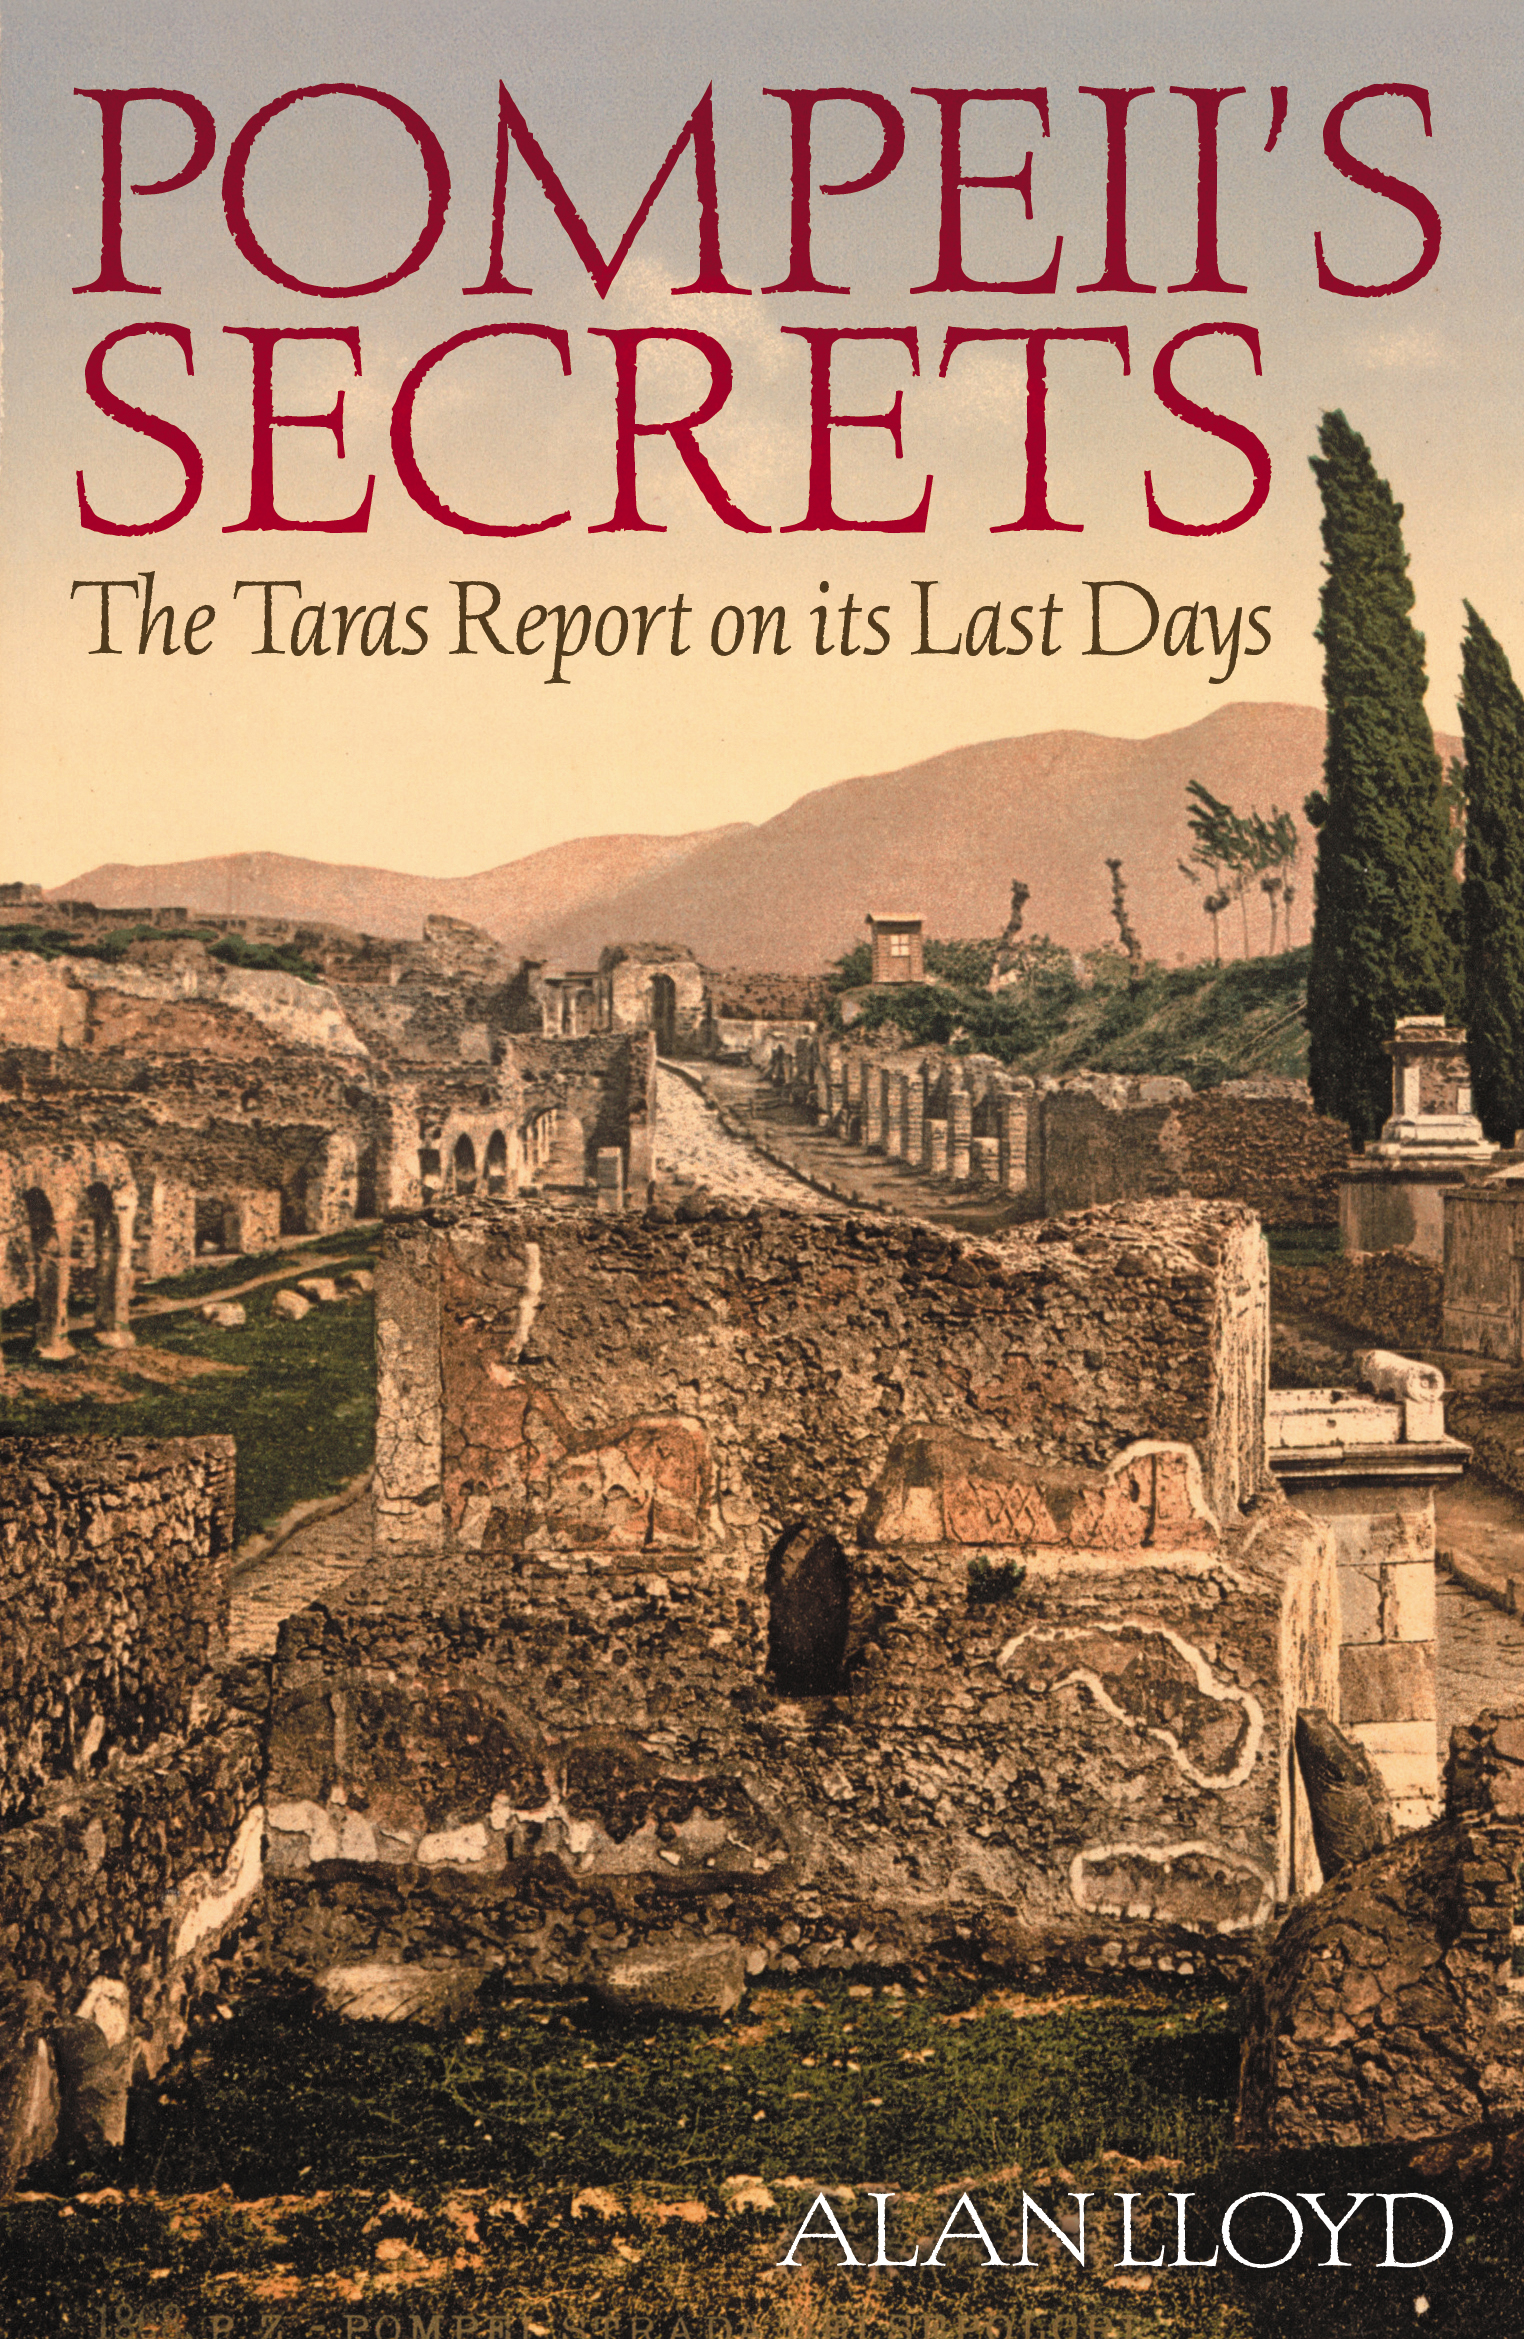 Reviewer Required for ‘Pompeii’s Secrets: The Taras Report on its Last Days’